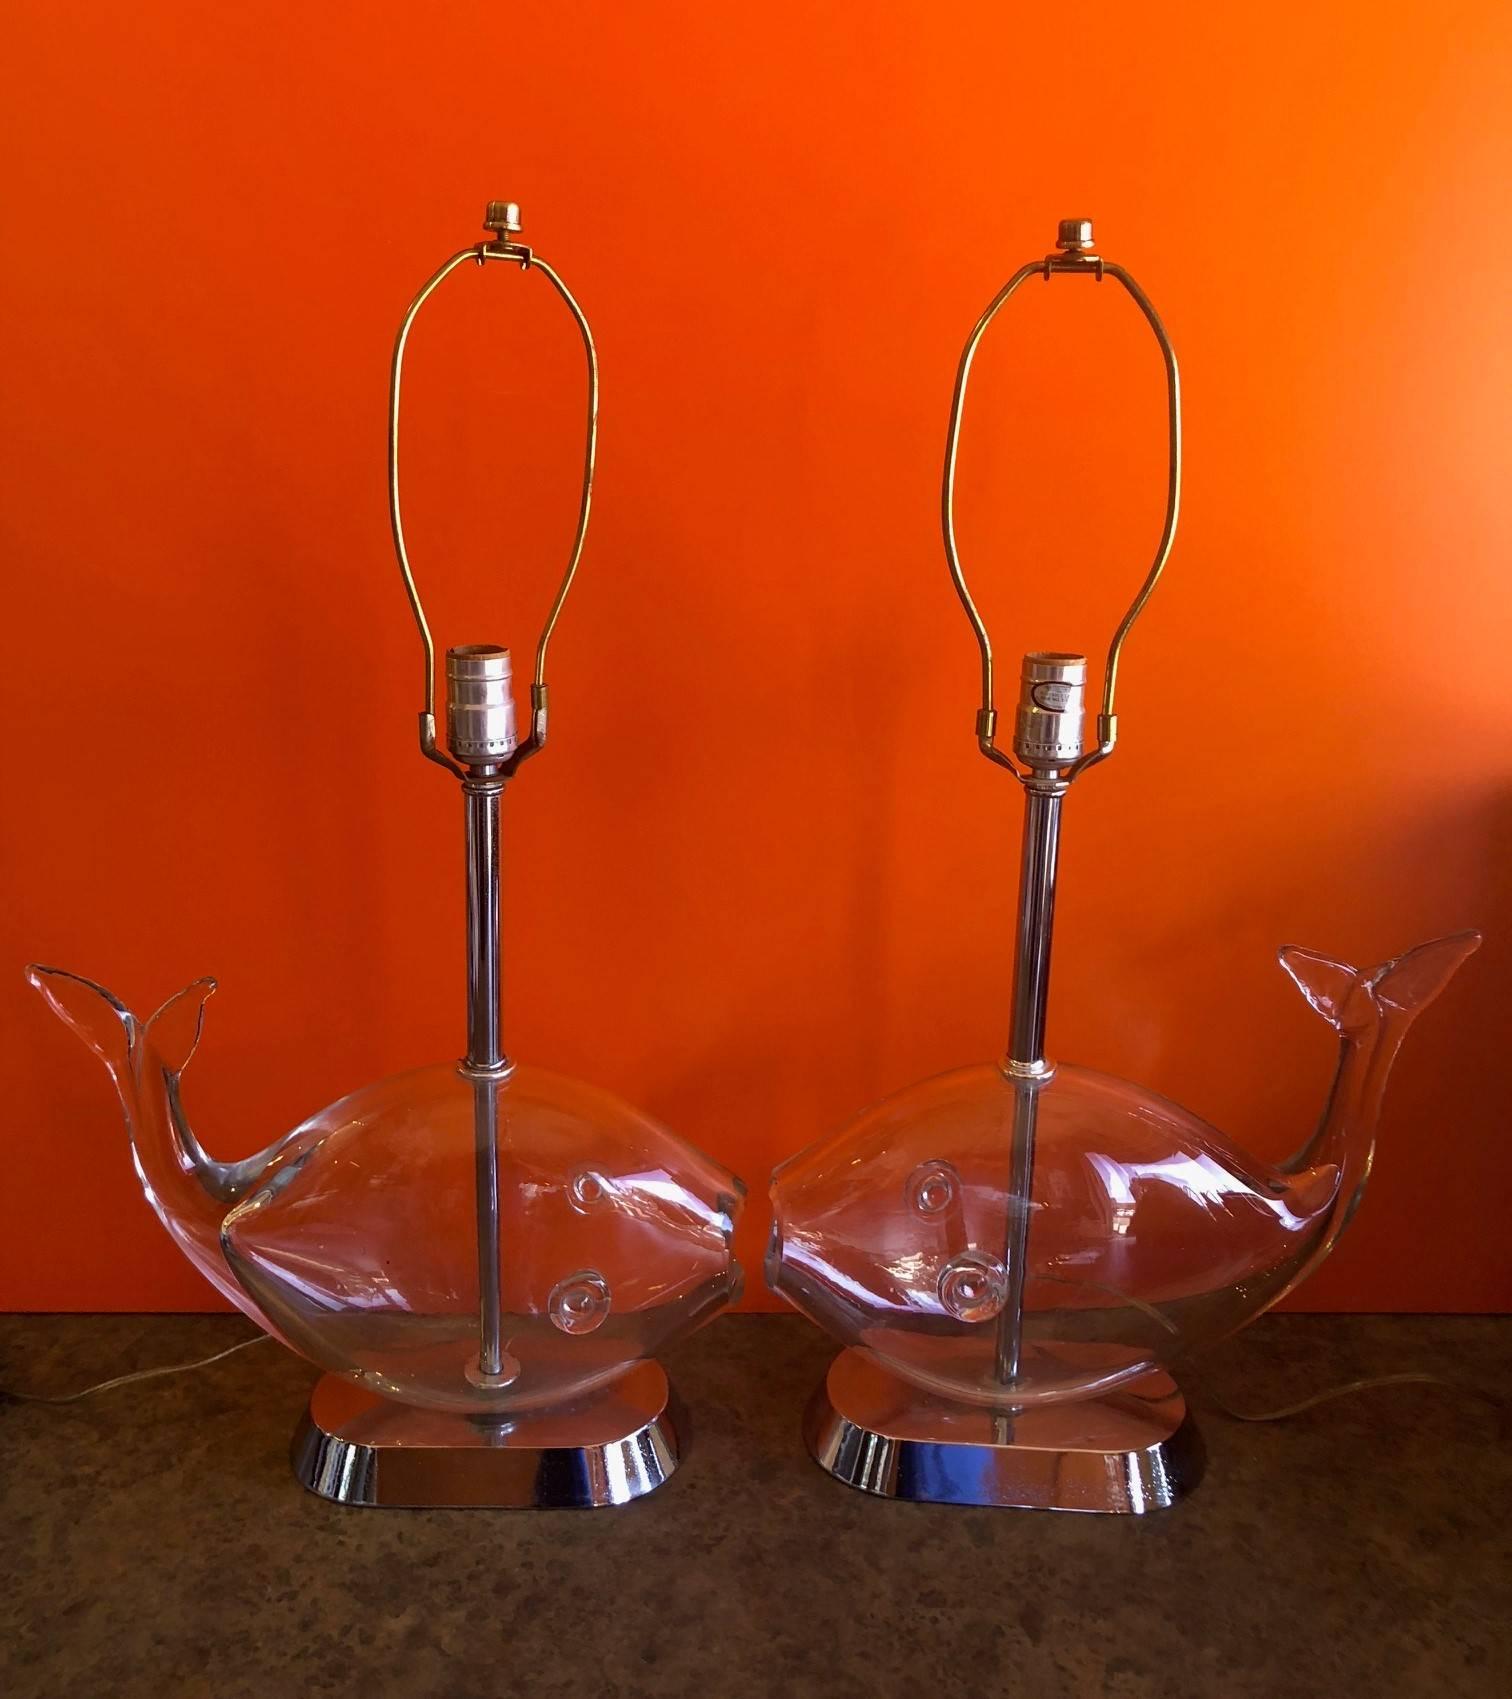 Pair of midcentury glass fish lamps by Blenko, circa 1960s. The lamps are handblown clear glass fish mounted on a chrome base with a chrome stem and include two stitched rawhide lamp shades. The lamps are in very good vintage working condition with